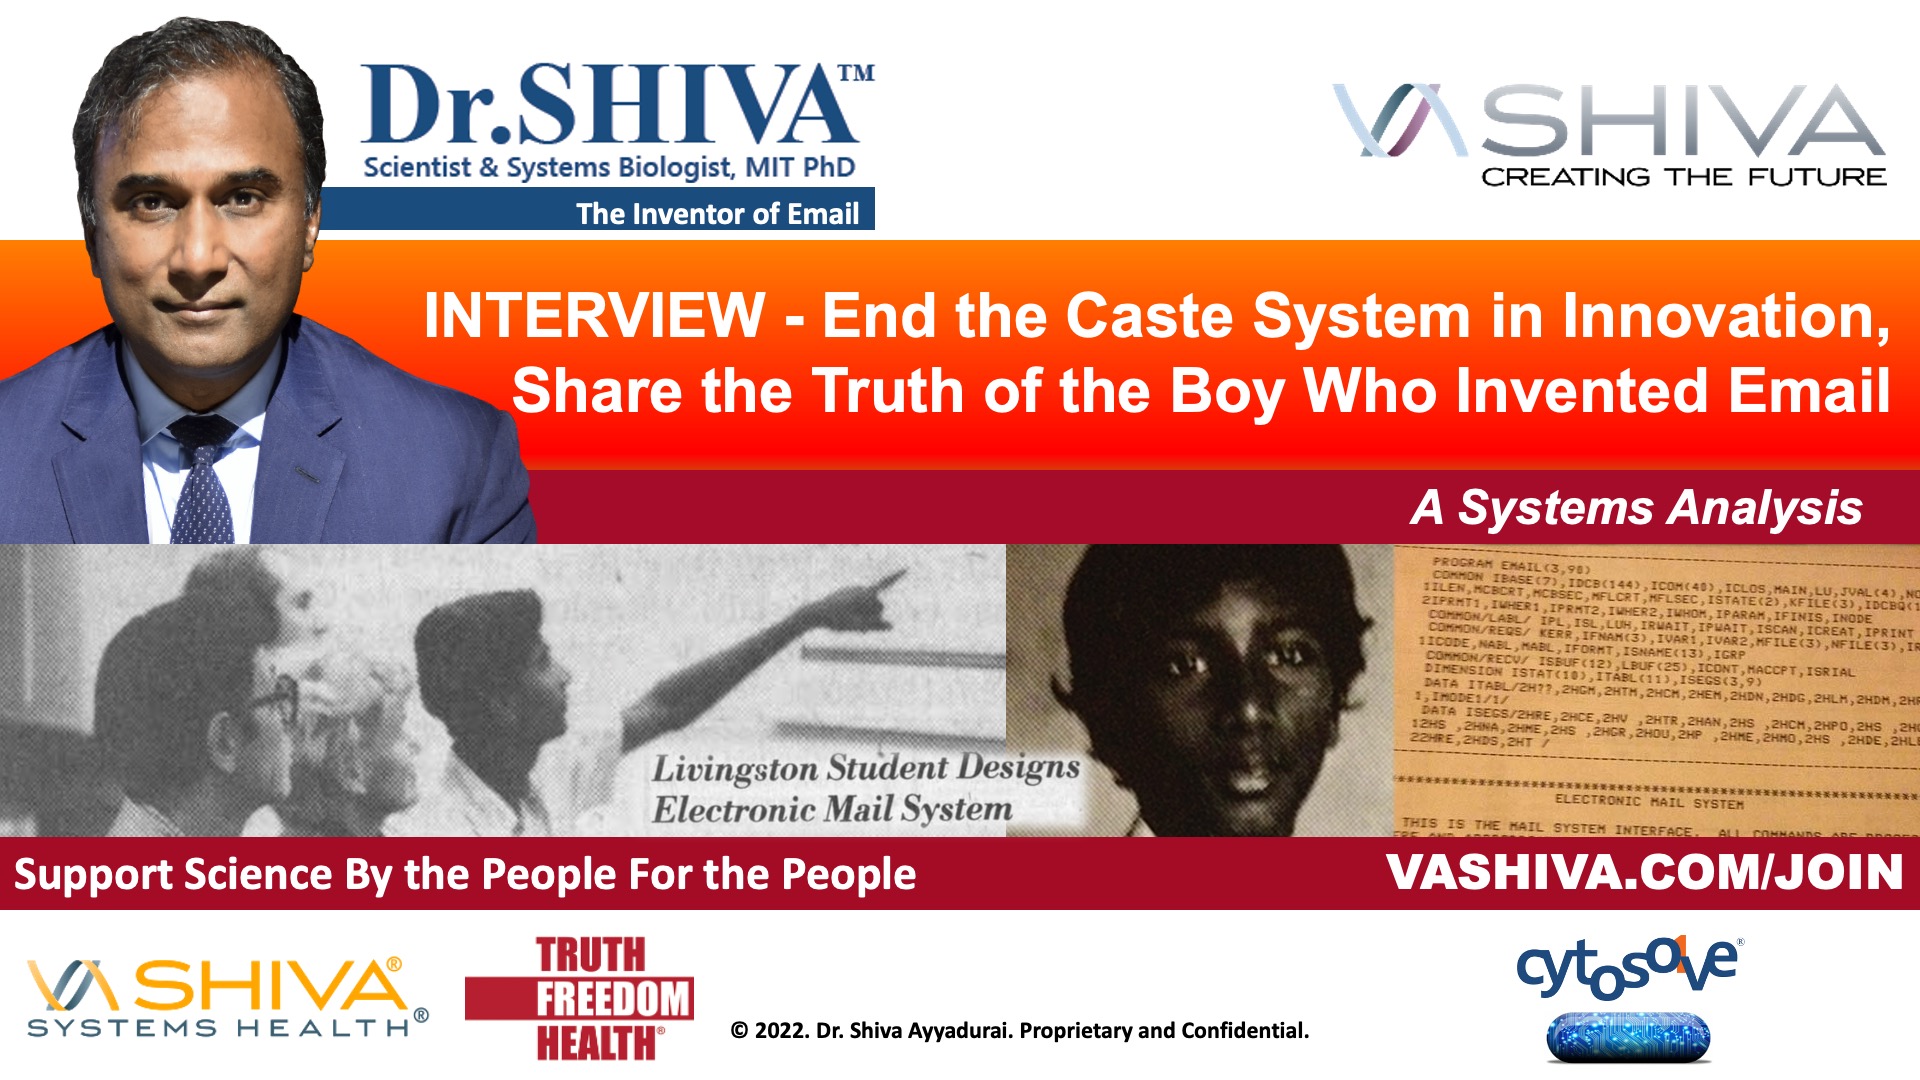 Dr.SHIVA LIVE: End the Caste System in Innovation, Share the Truth of the Boy Who Invented Email - An INTERVIEW